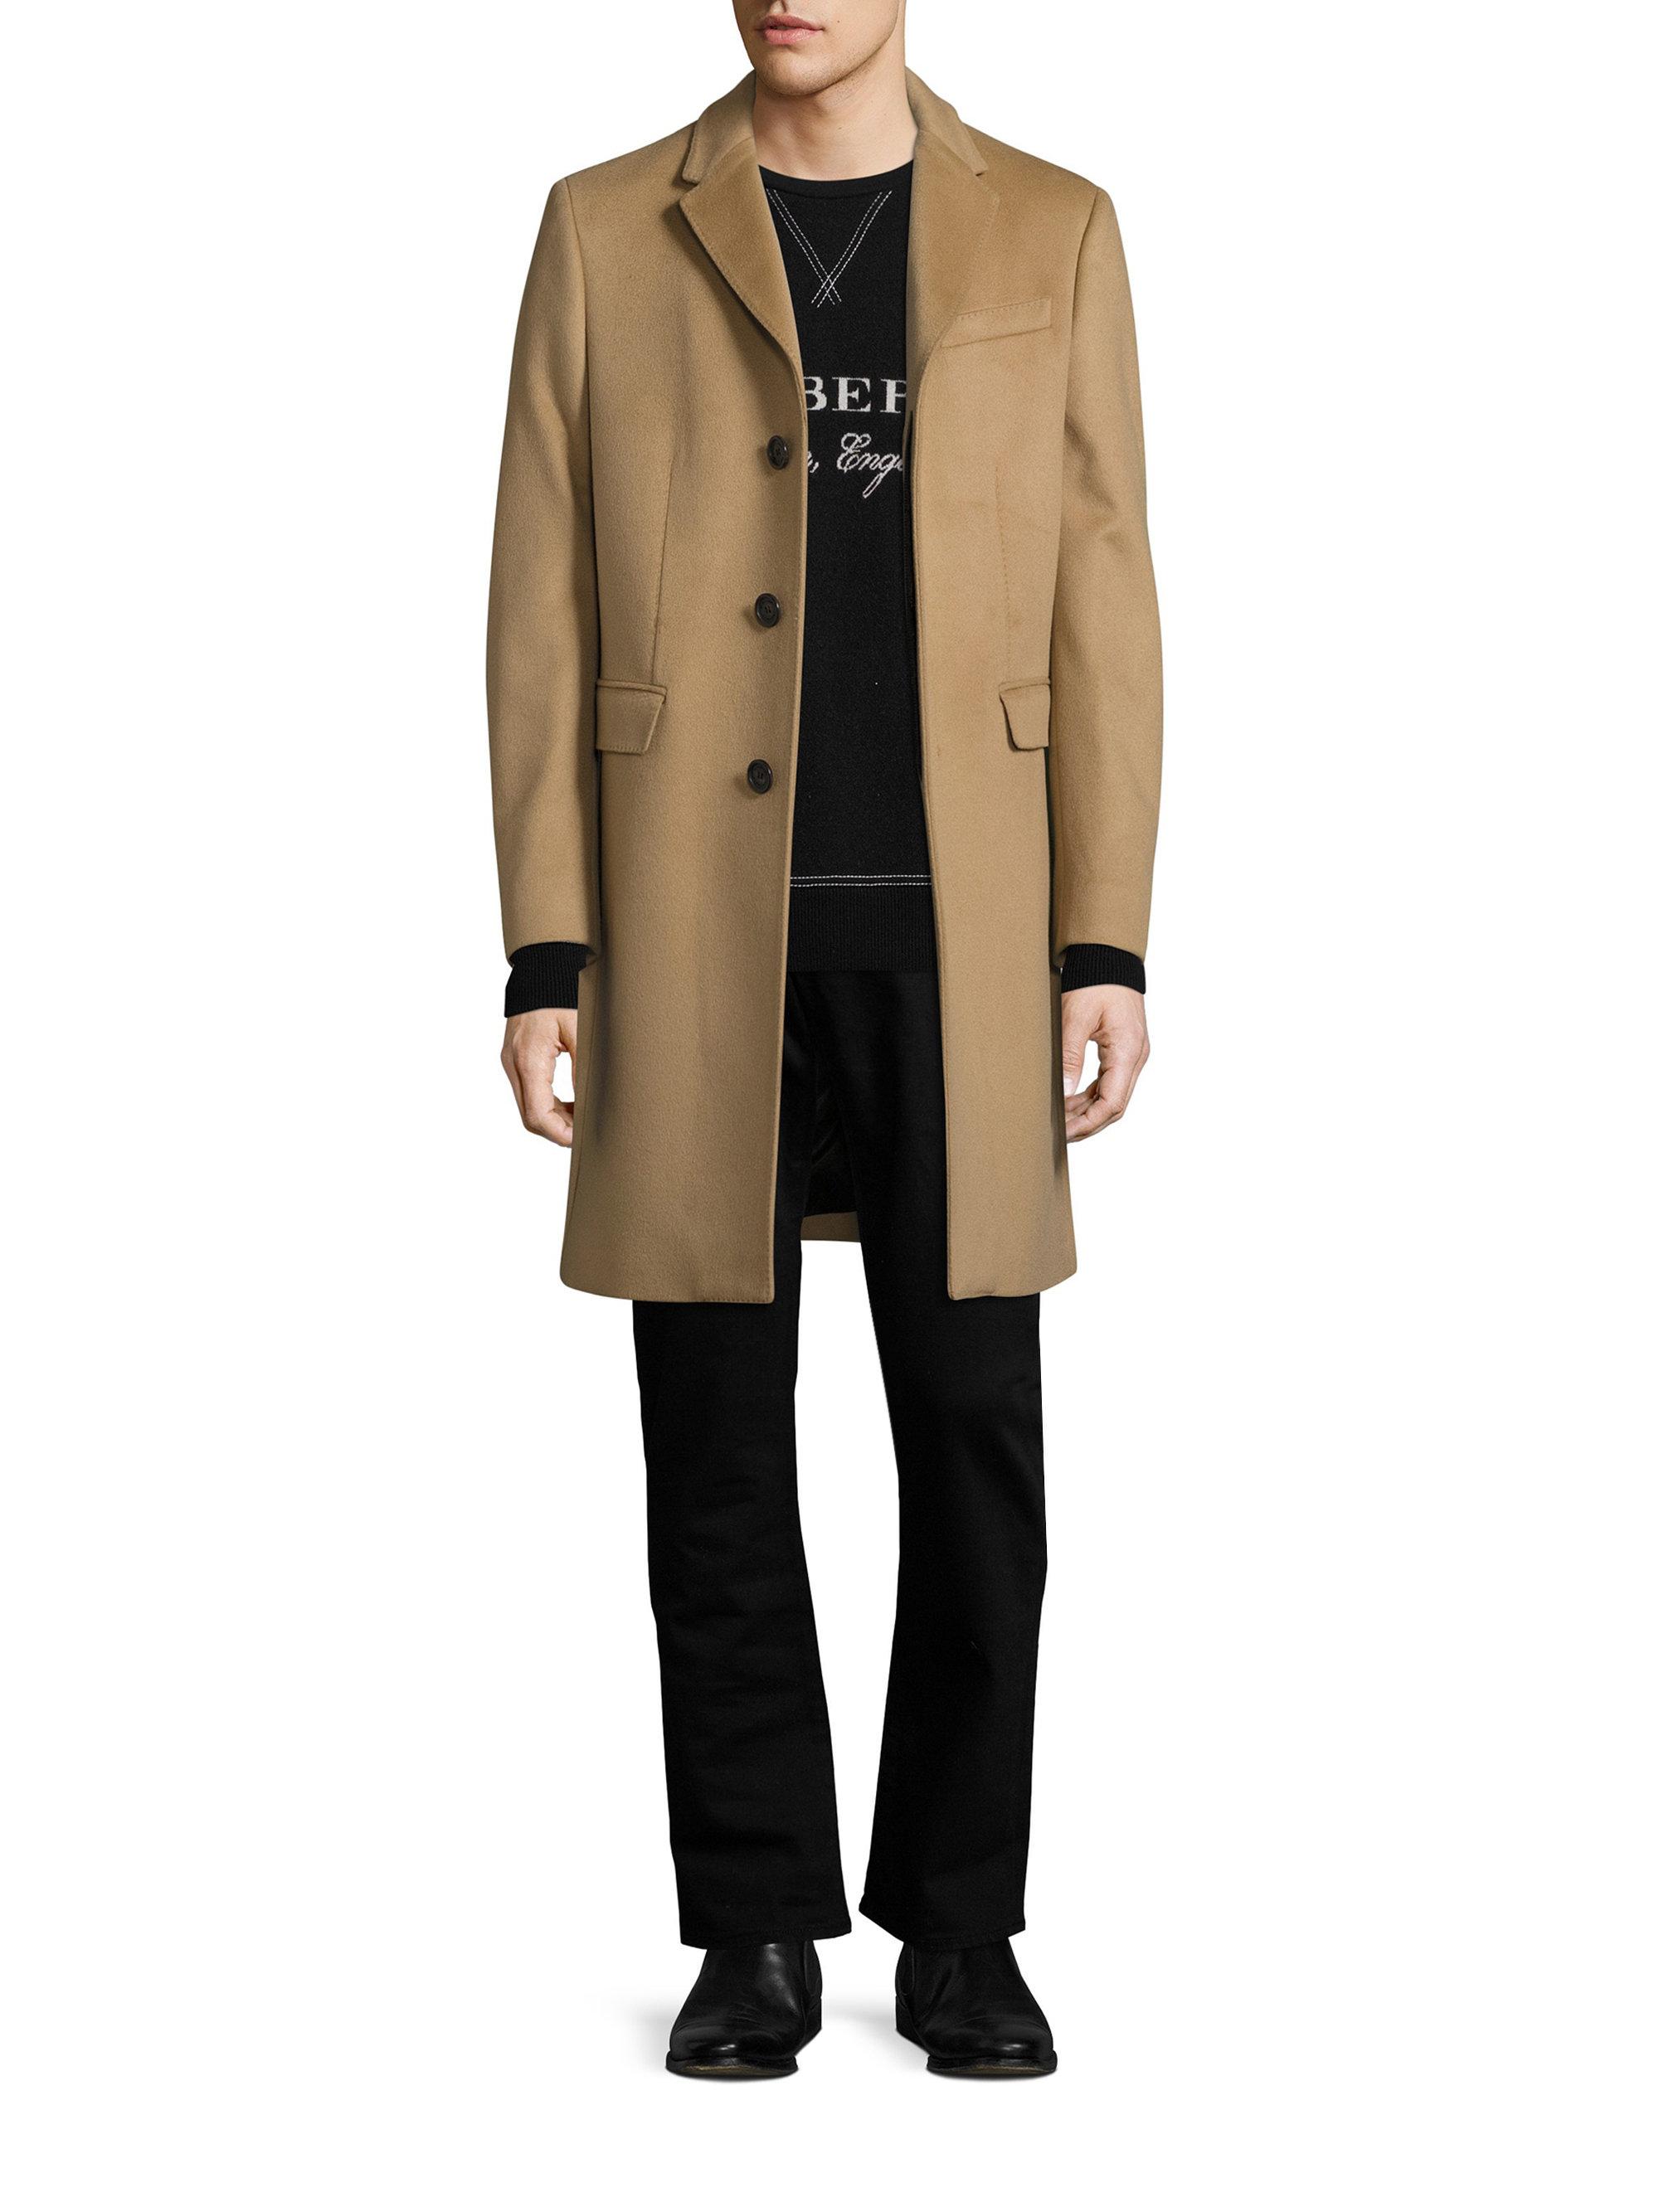 Burberry Hawksley Wool & Cashmere Overcoat in Camel (Blue) for Men - Lyst